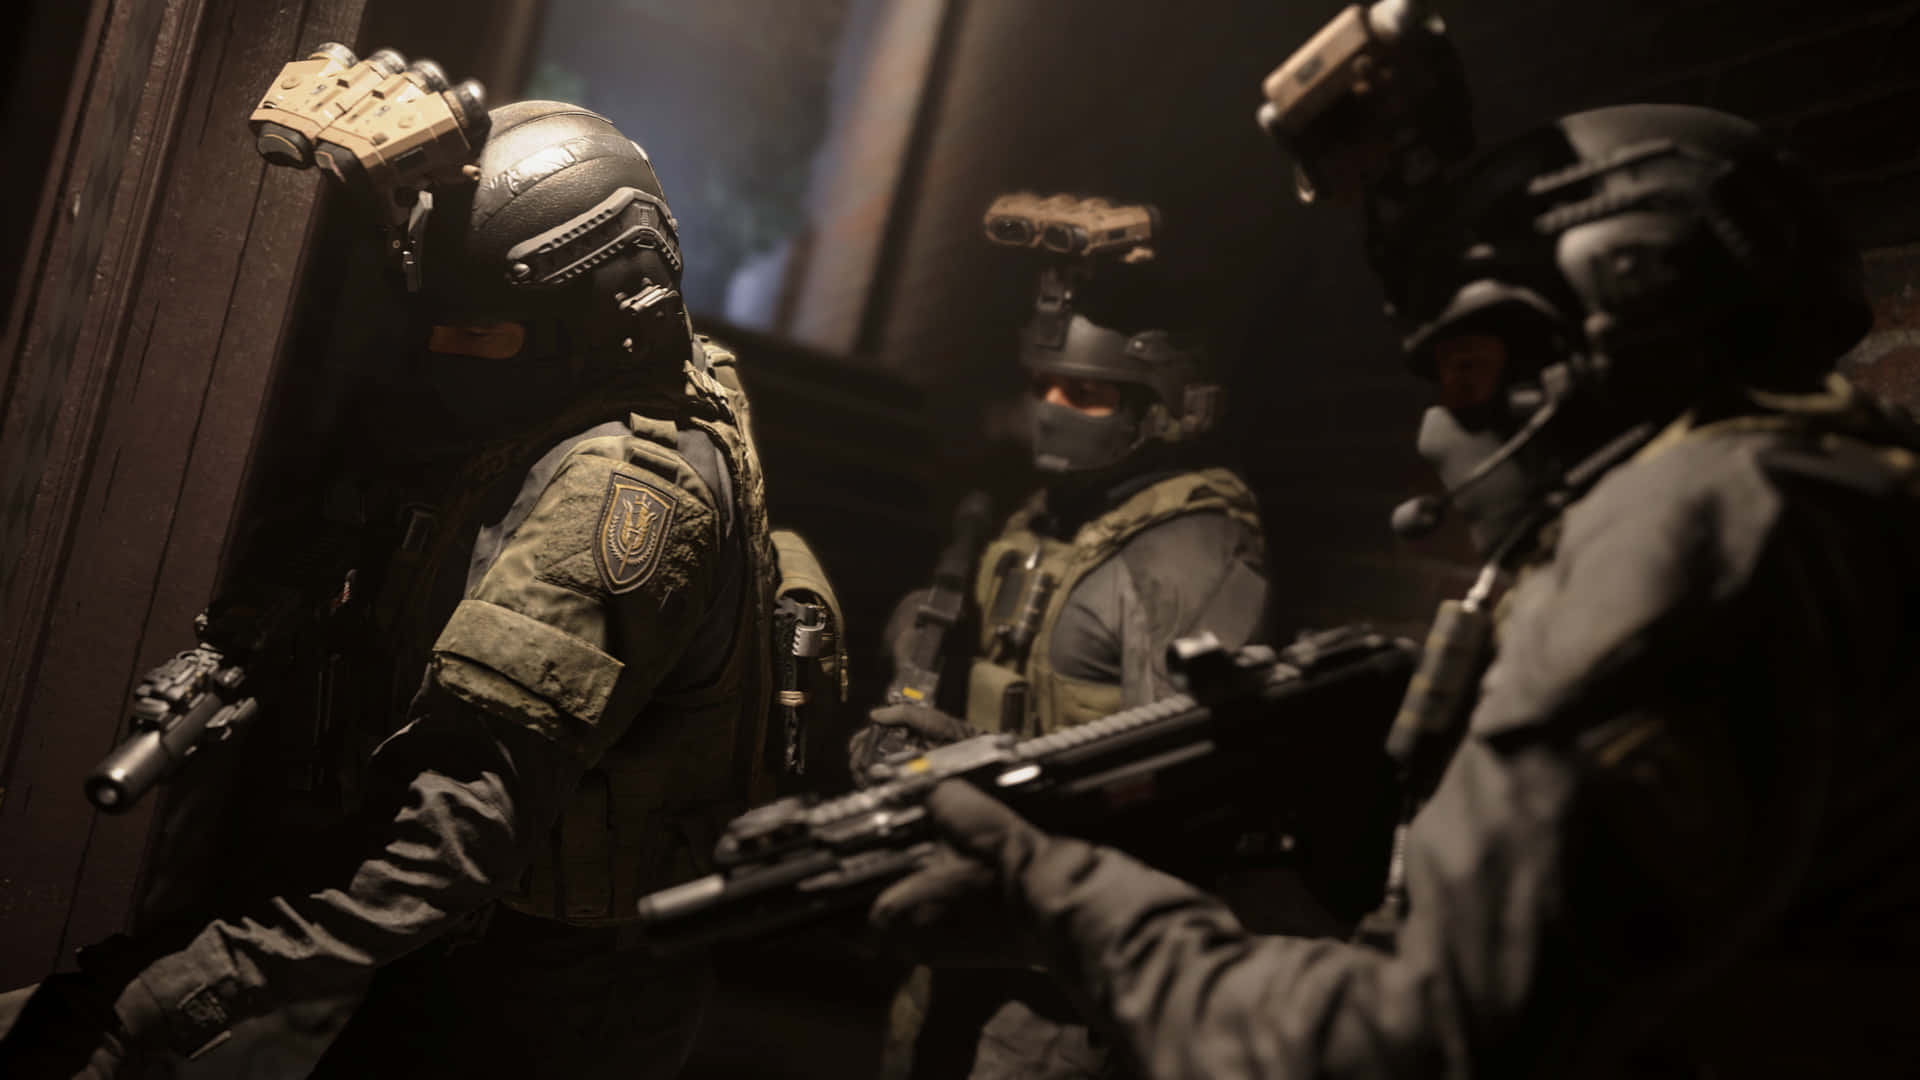 Join the fight against an unprecedented threat in Call Of Duty: Modern Warfare on PS4 today.